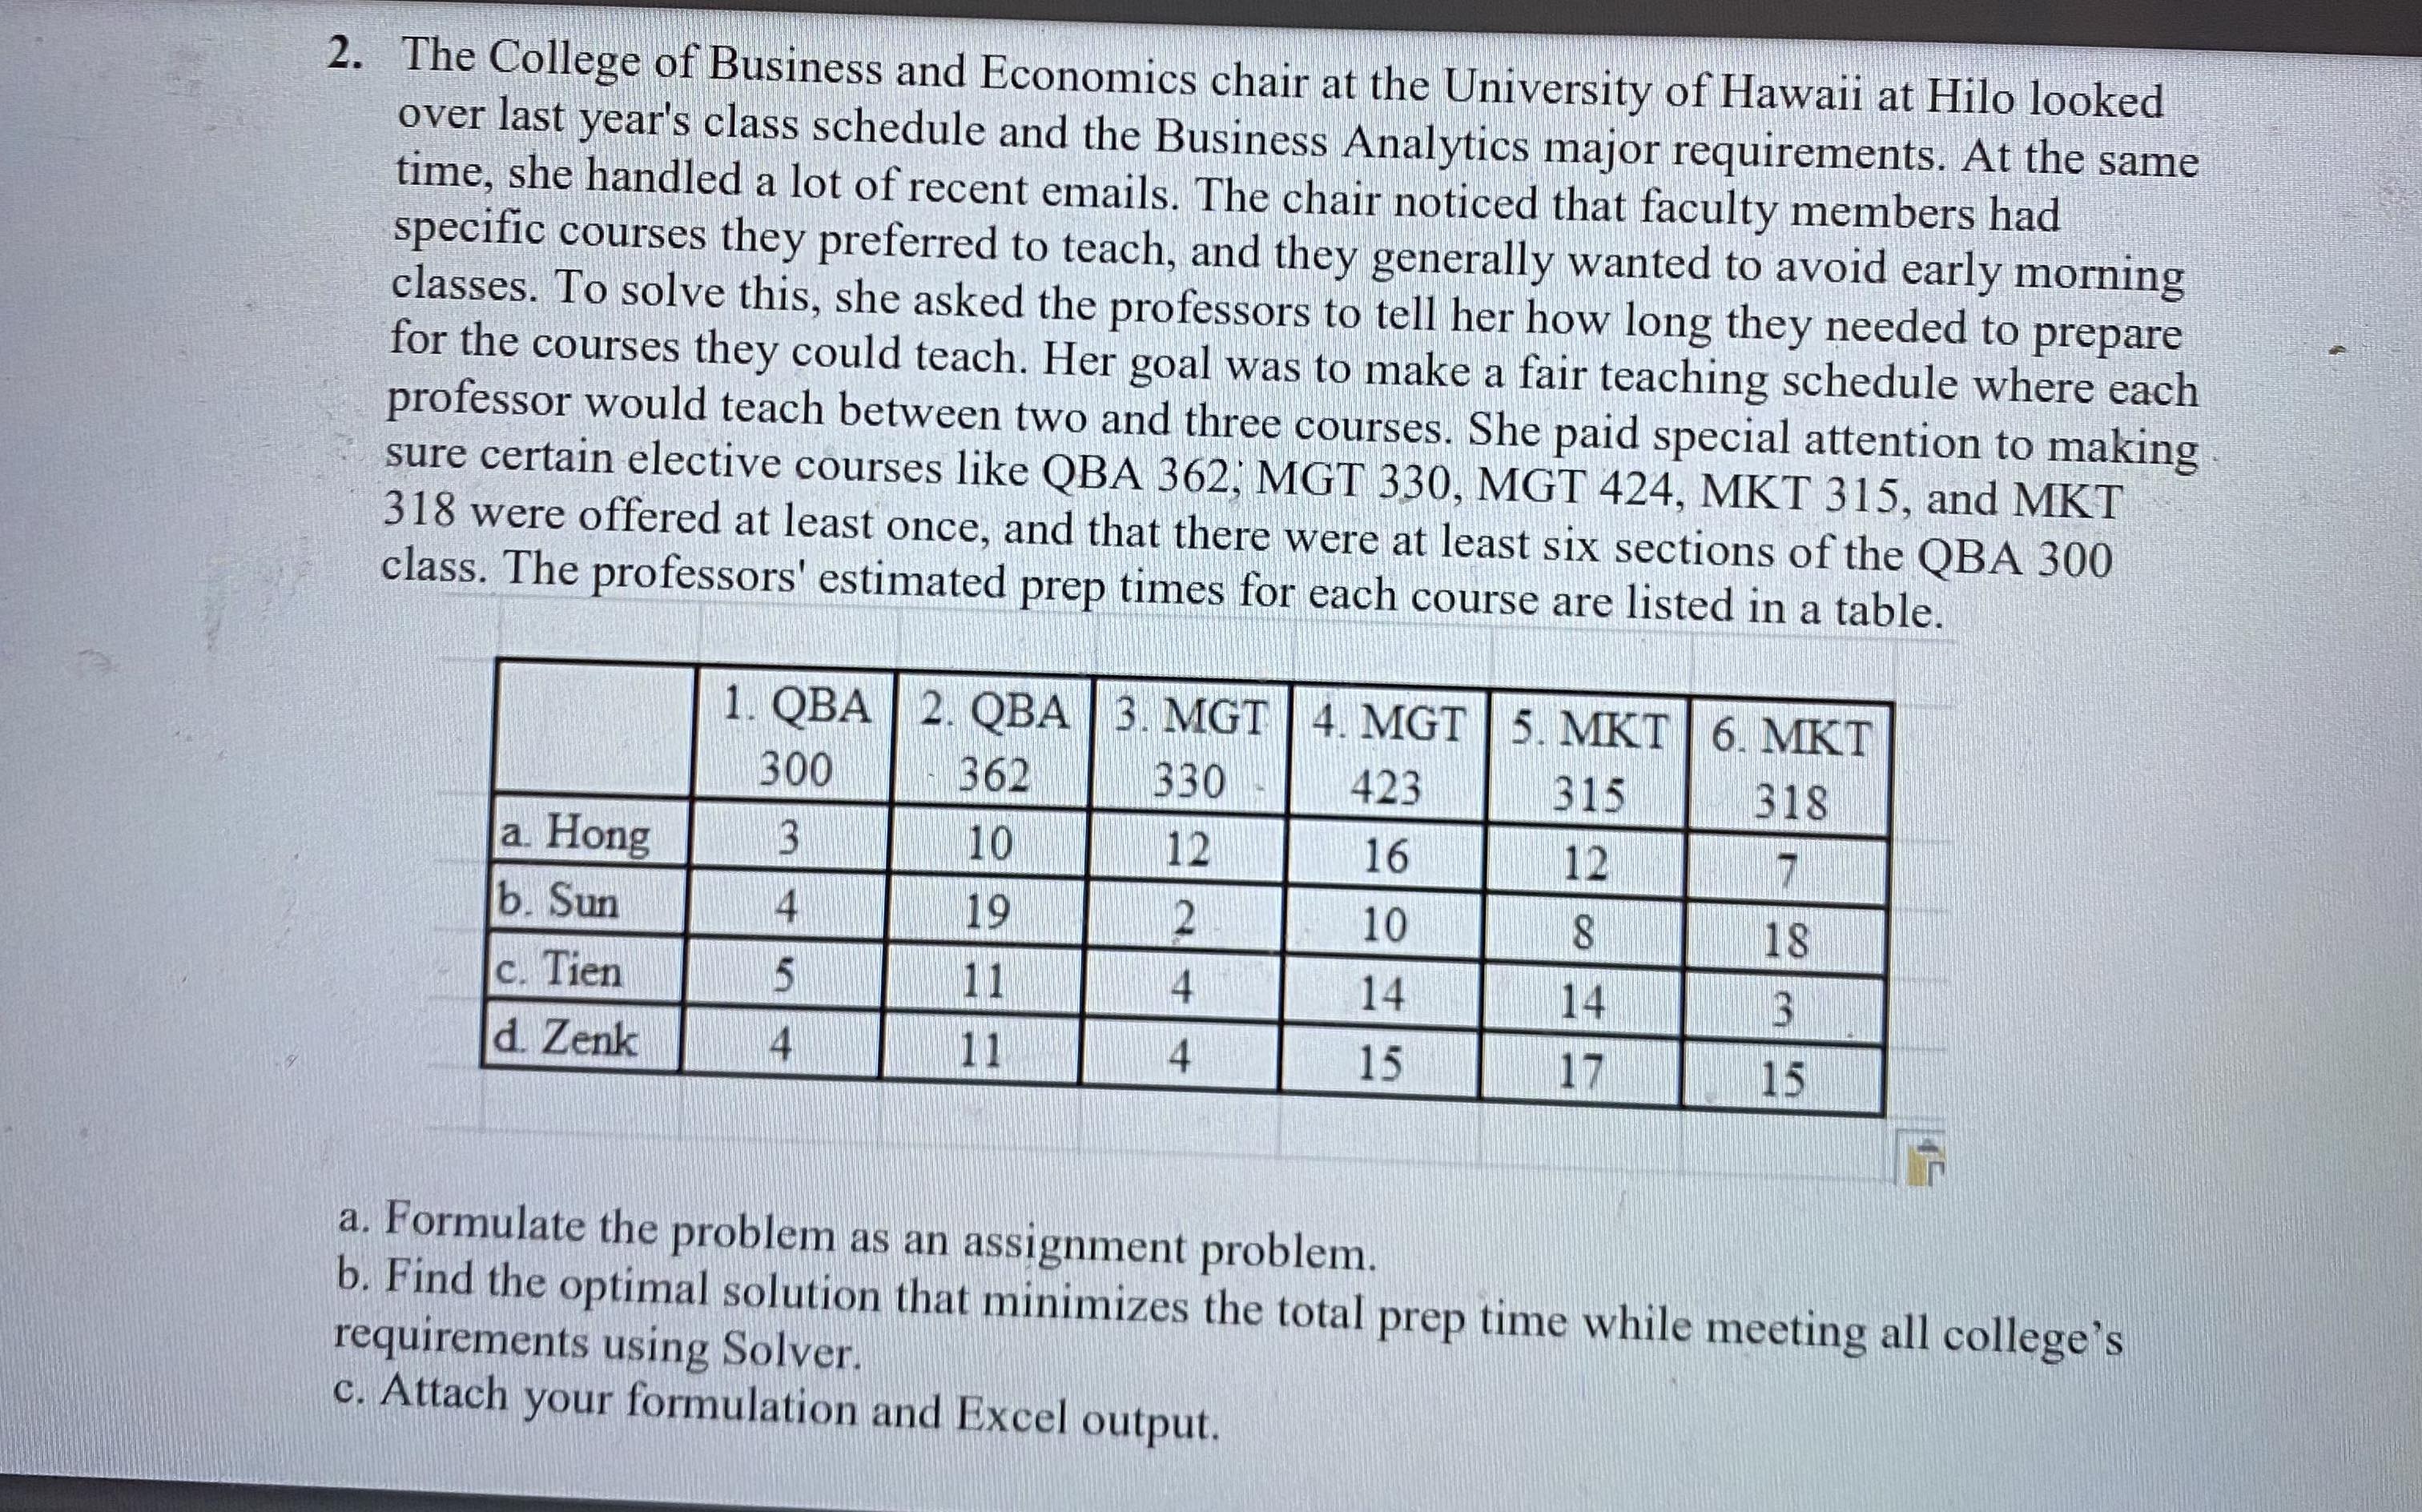 2. The College of Business and Economics chair at the University of Hawaii at Hilo looked over last year's